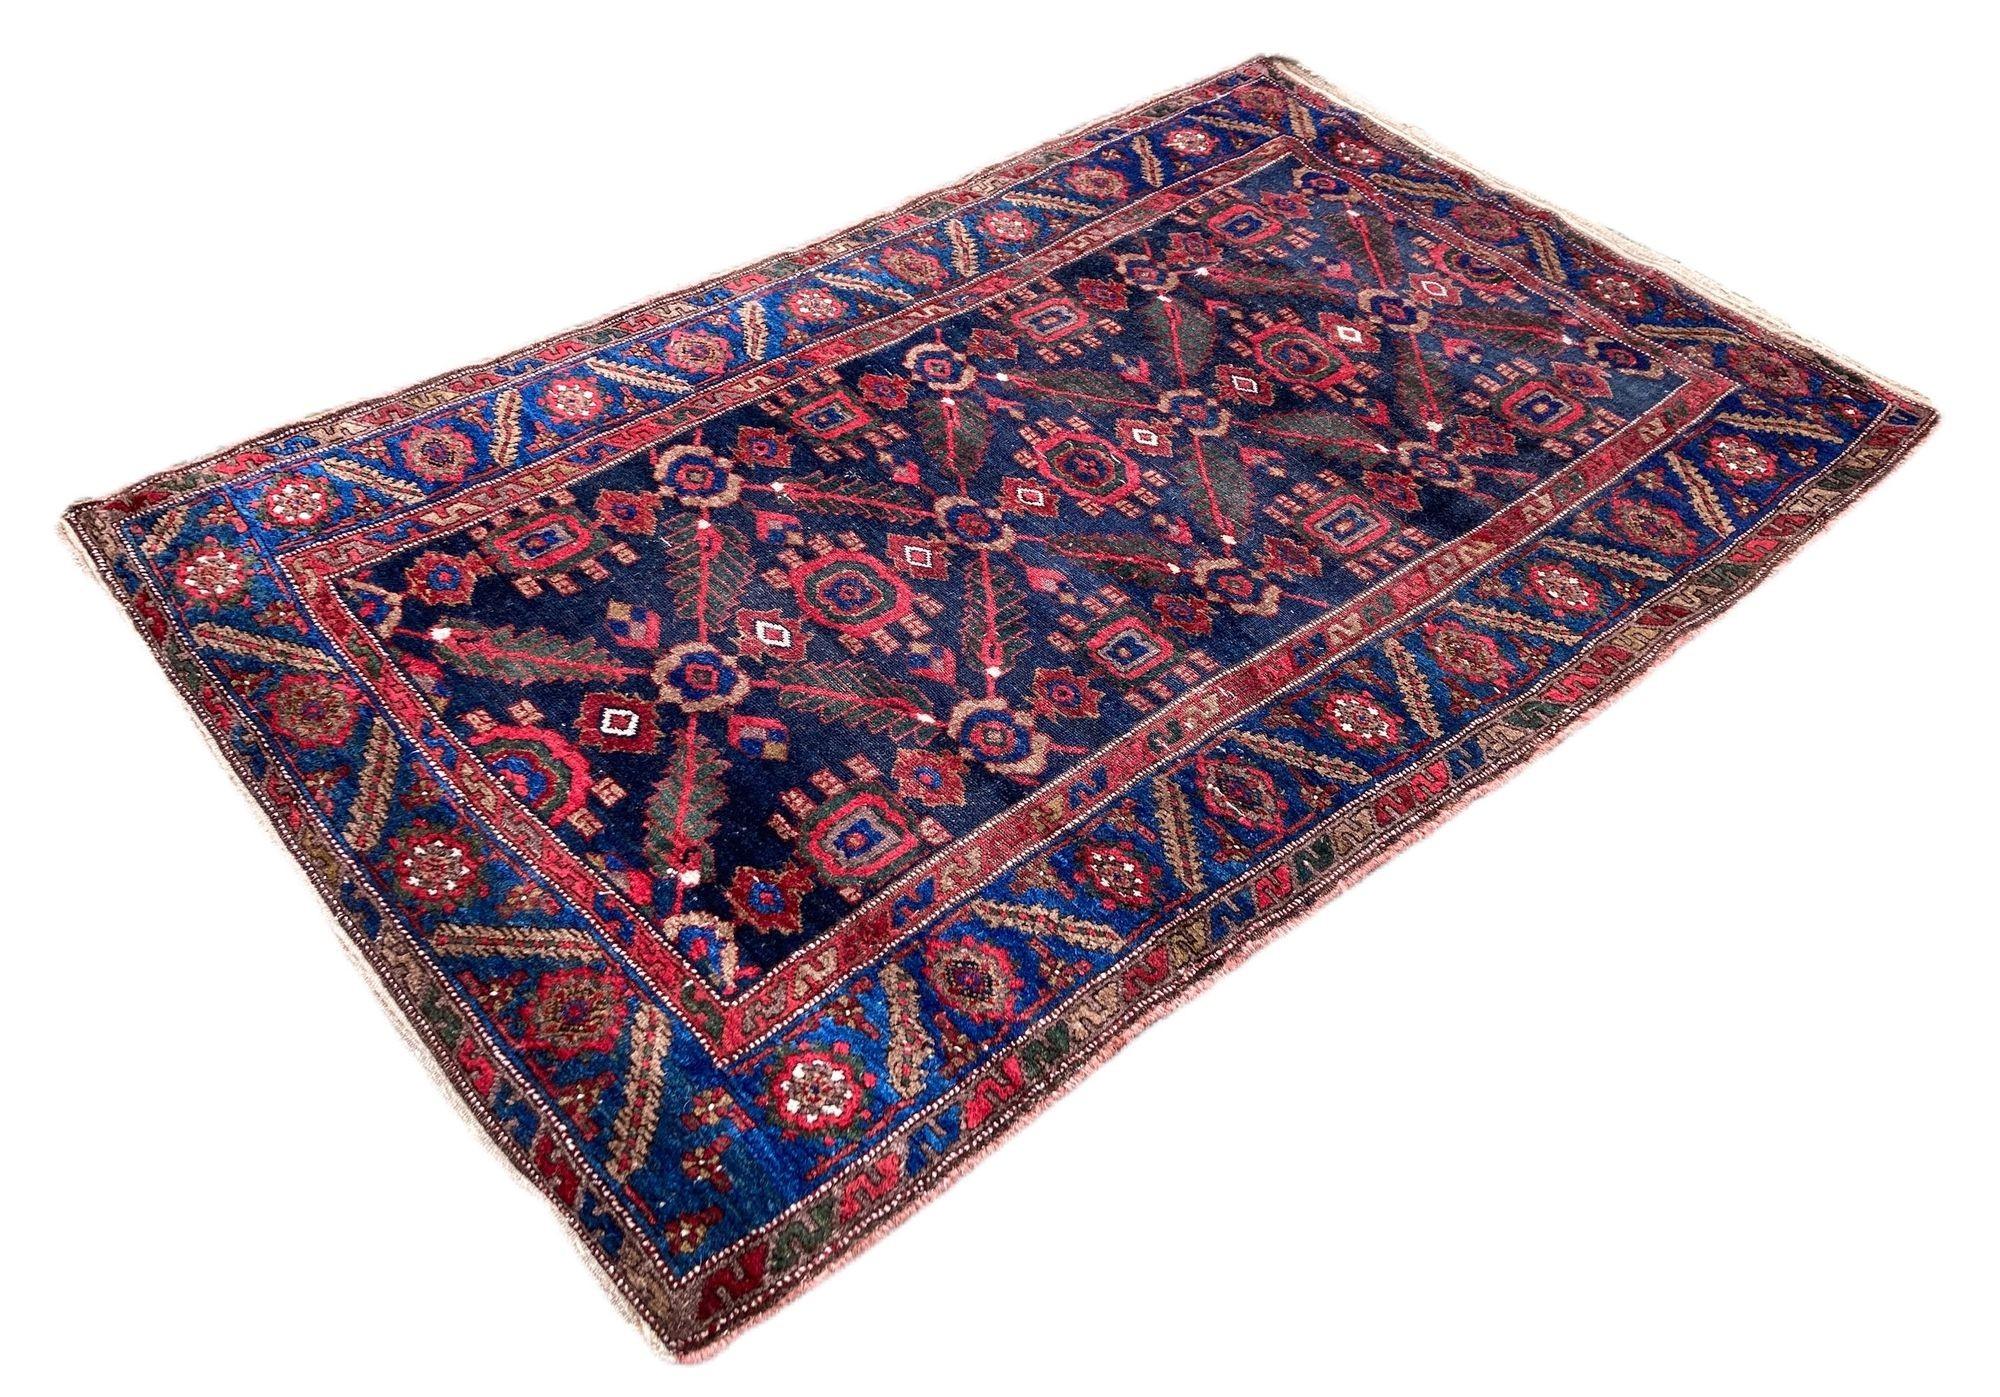 Antique Kurdish Rug 2.06m x 1.31m In Good Condition For Sale In St. Albans, GB